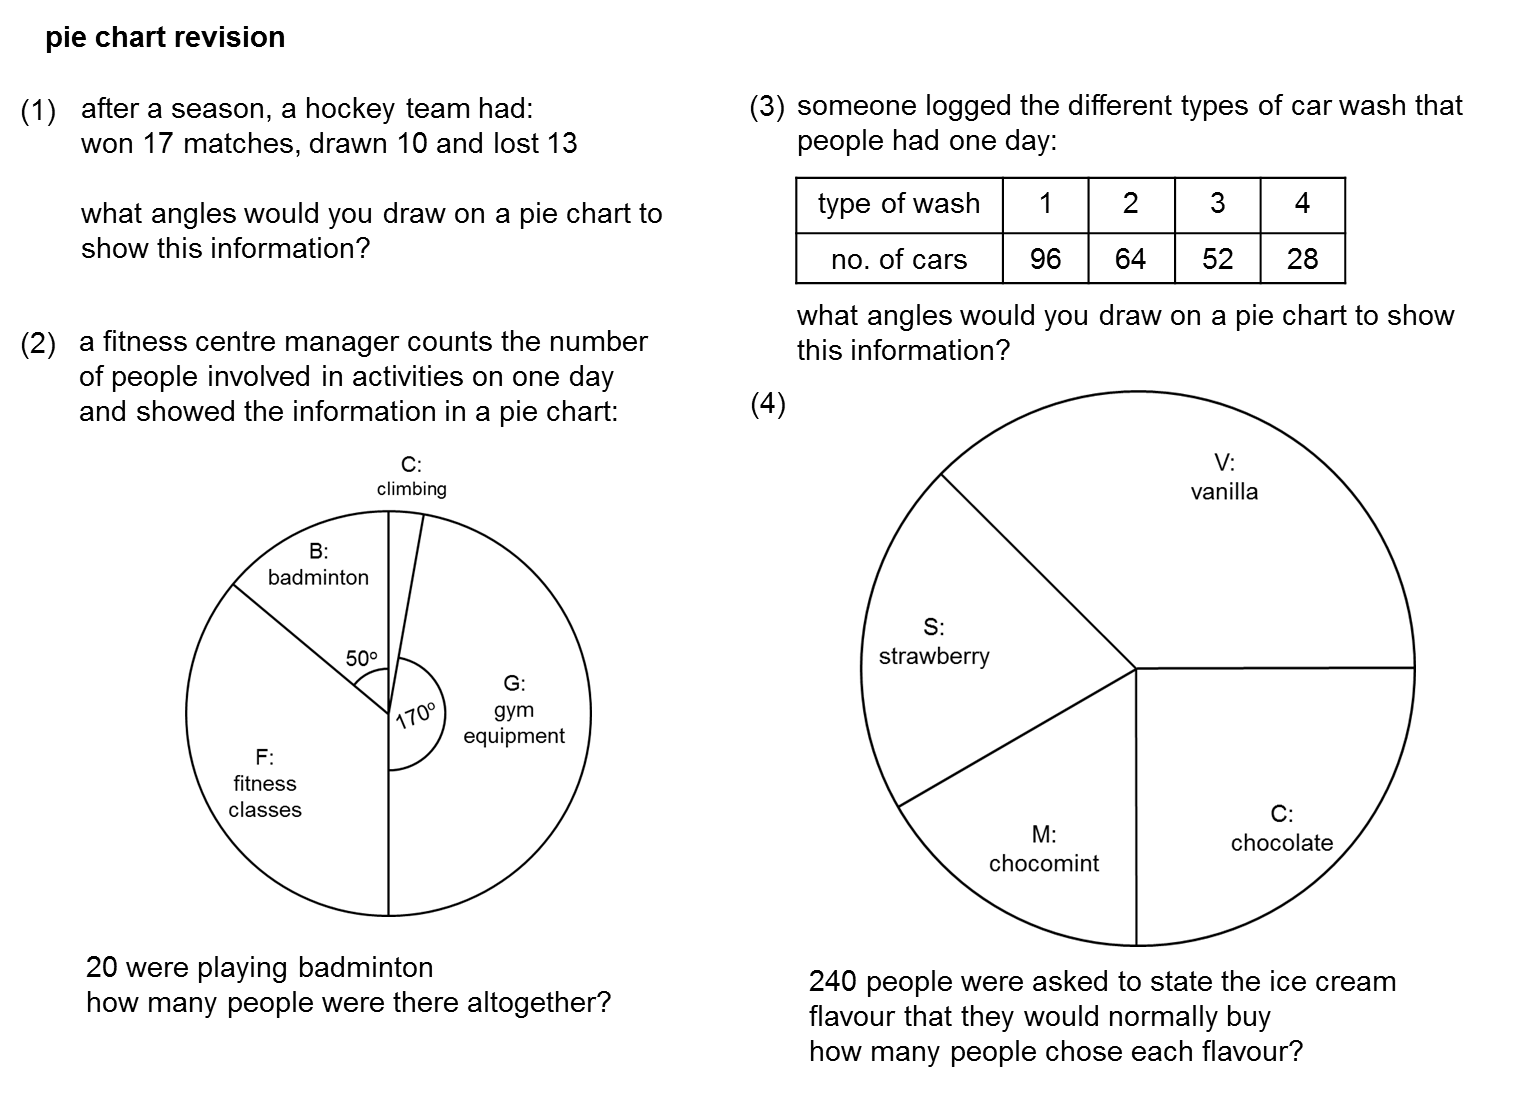 MEDIAN practice and quiz questions: pie charts